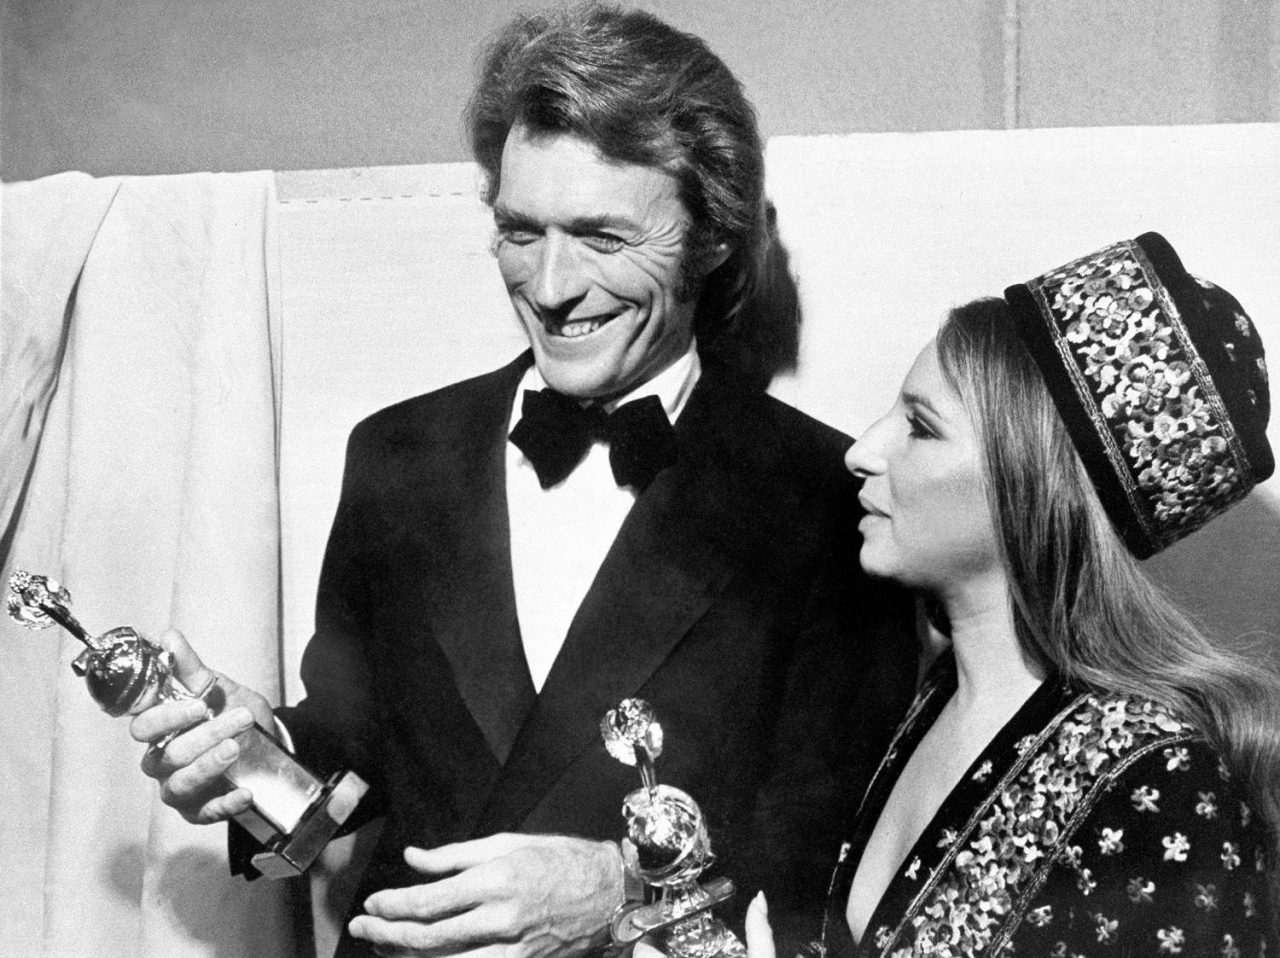 Image Of Clint Eastwood And Actress Barbra Streisand